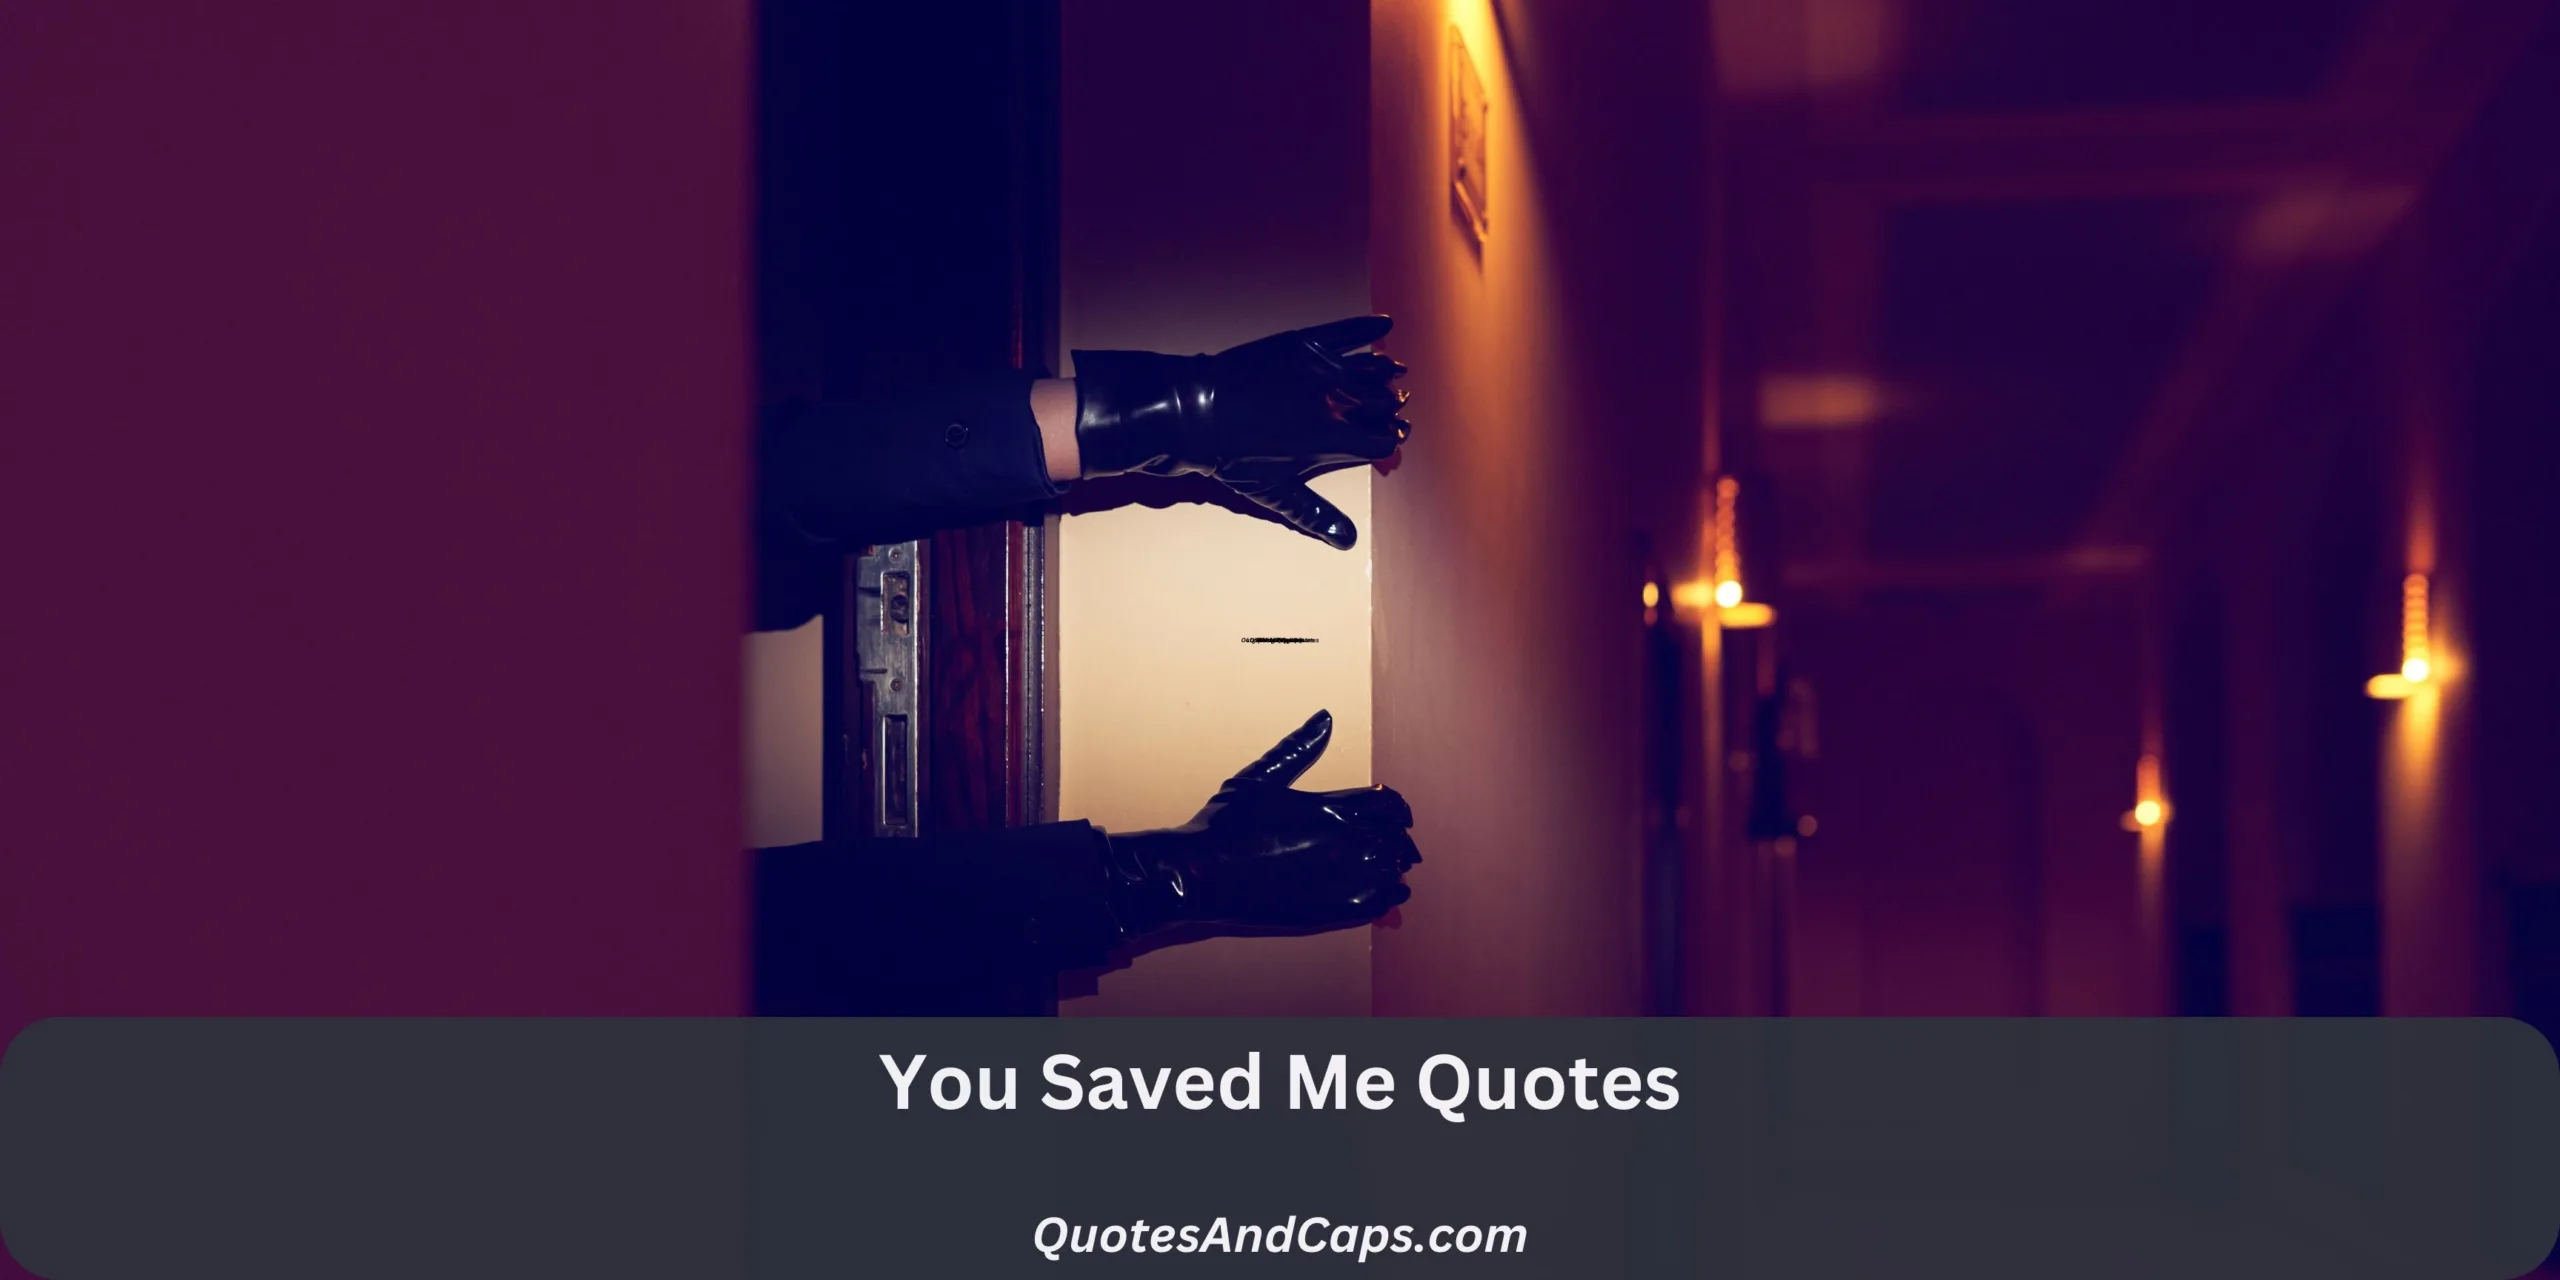 You Saved Me Quotes